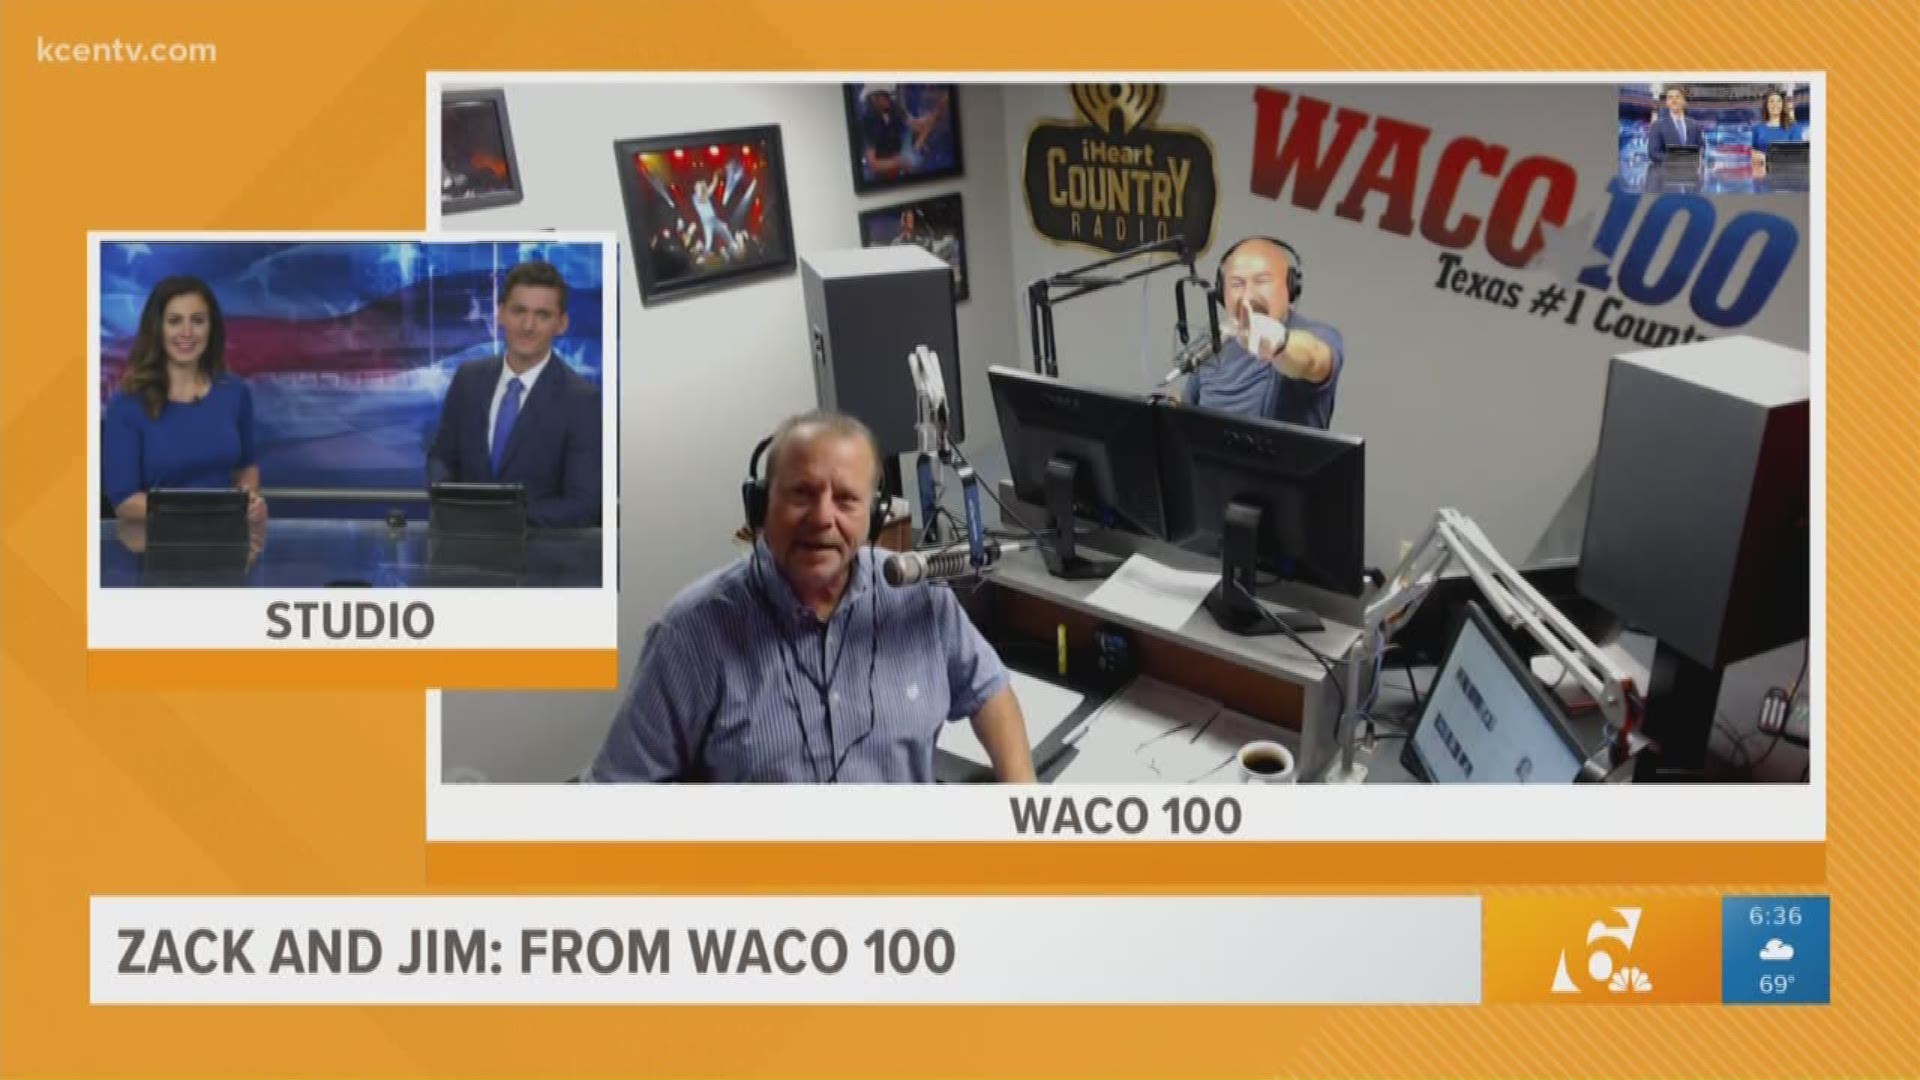 Zack and Jim join Texas Today to talk severe weather, Franklin community recovery efforts, and Kim Mulkey visiting the Waco 100 studio.